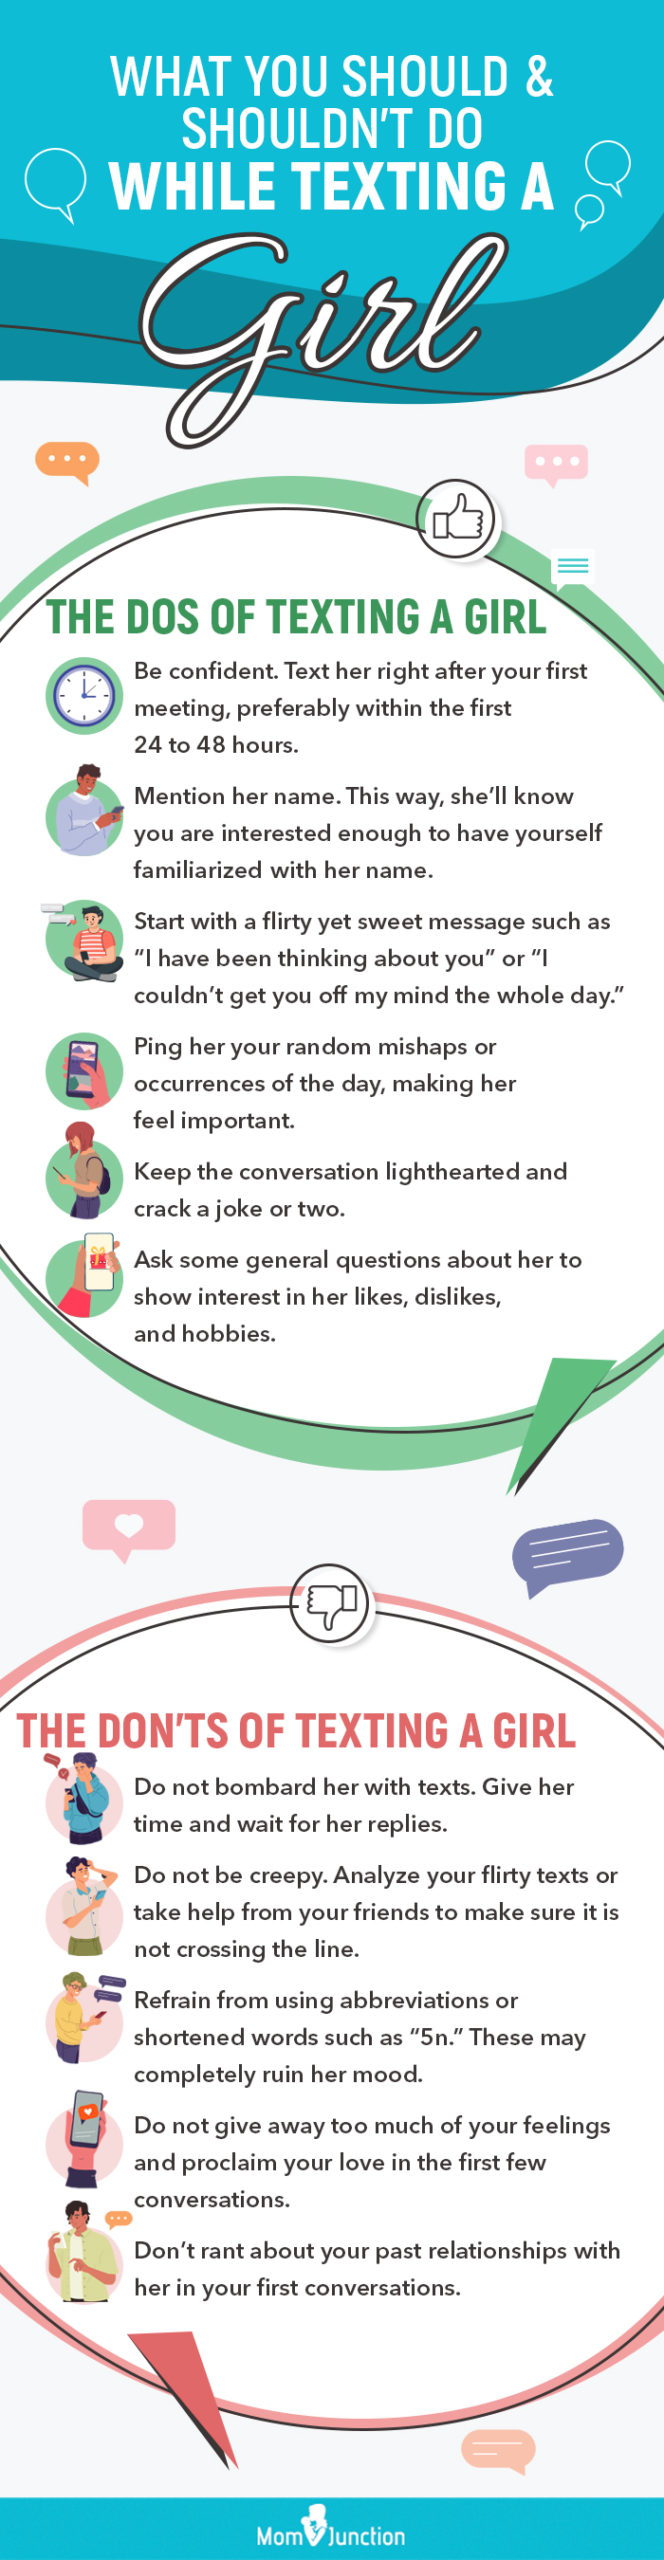 what you should and shouldn't do while texting a girl (infographic)